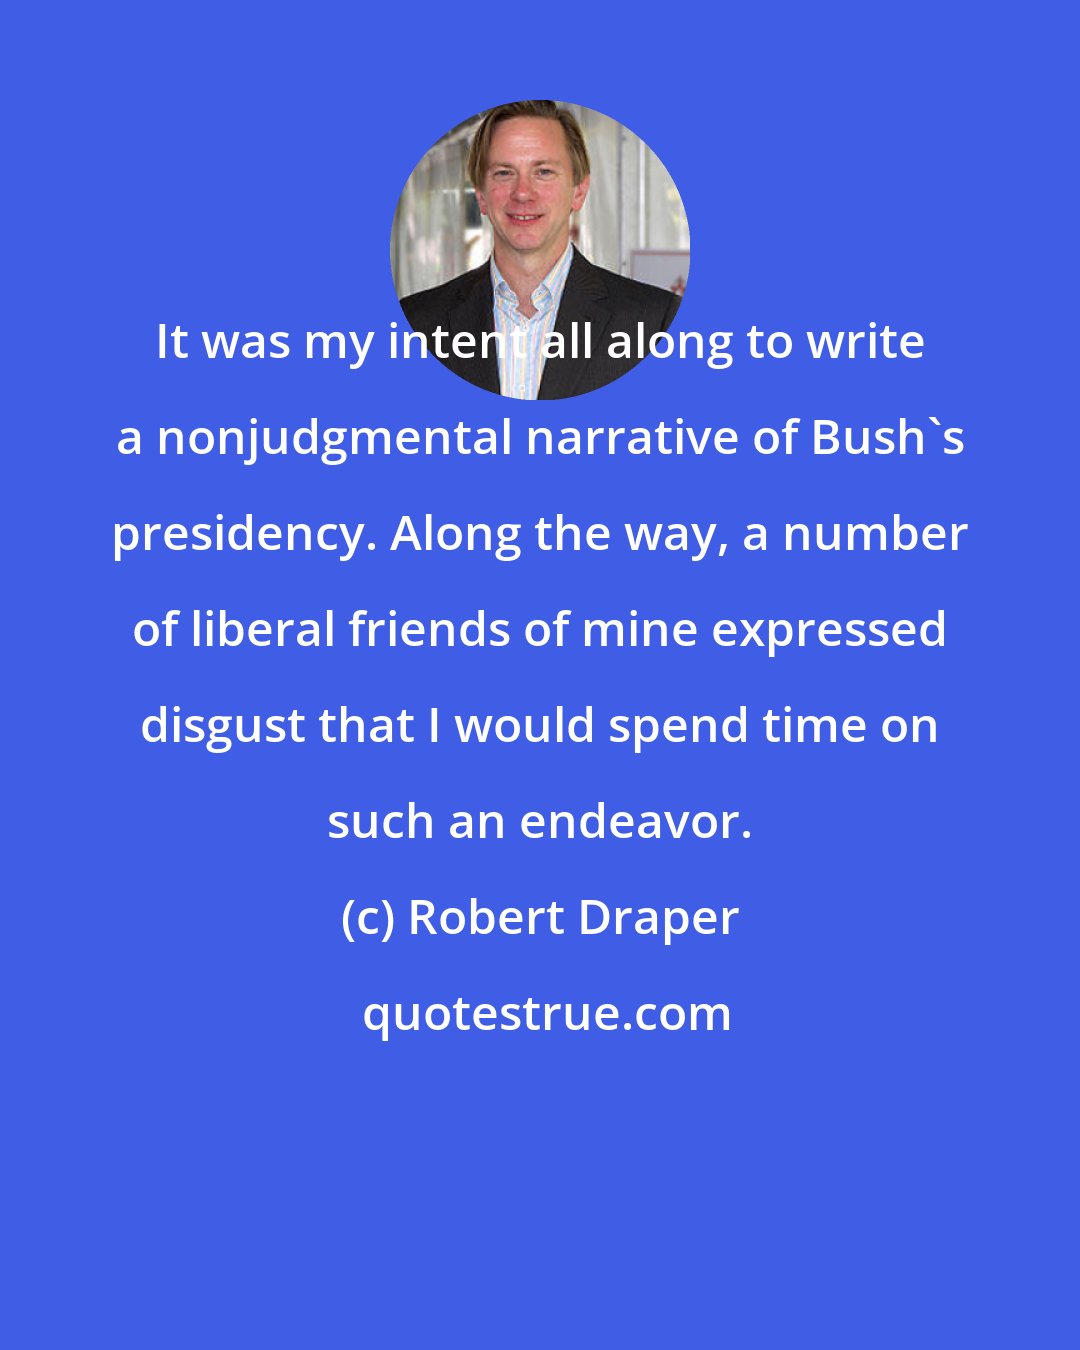 Robert Draper: It was my intent all along to write a nonjudgmental narrative of Bush's presidency. Along the way, a number of liberal friends of mine expressed disgust that I would spend time on such an endeavor.